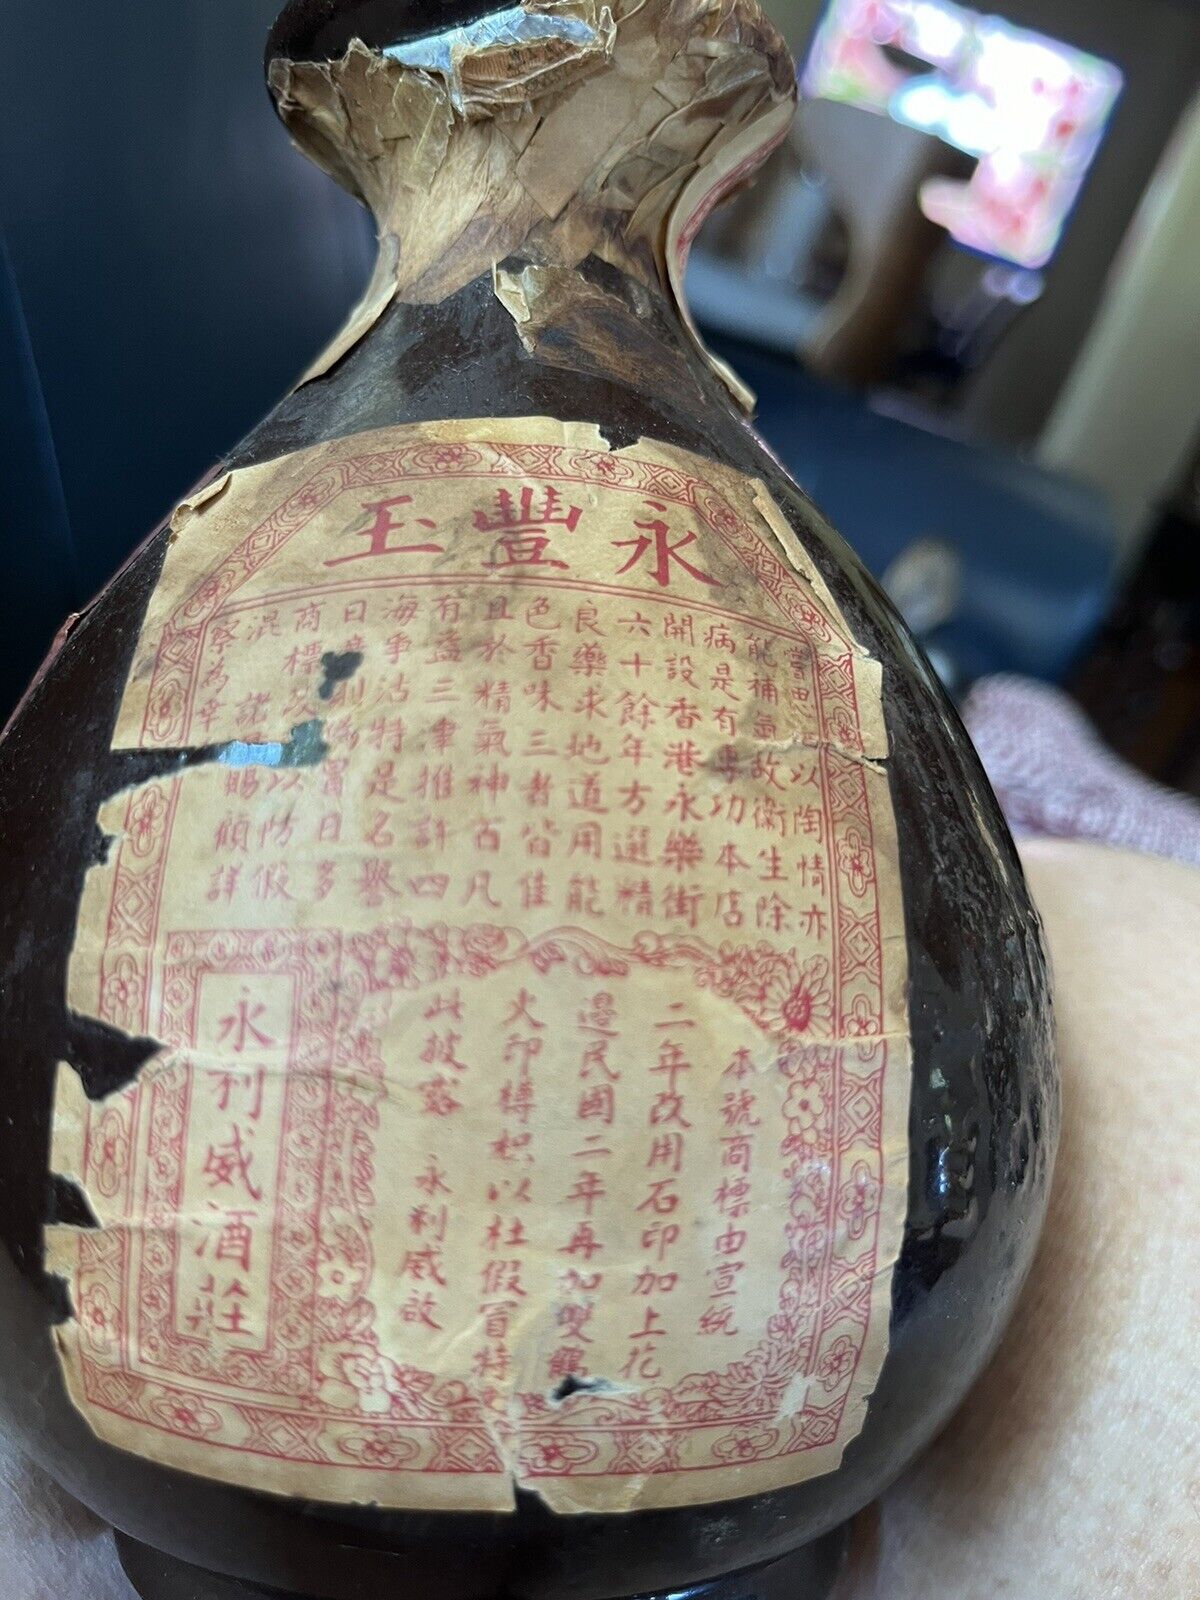 Rare Antique Chinese Liquor Bottle With Cork Import Stamps